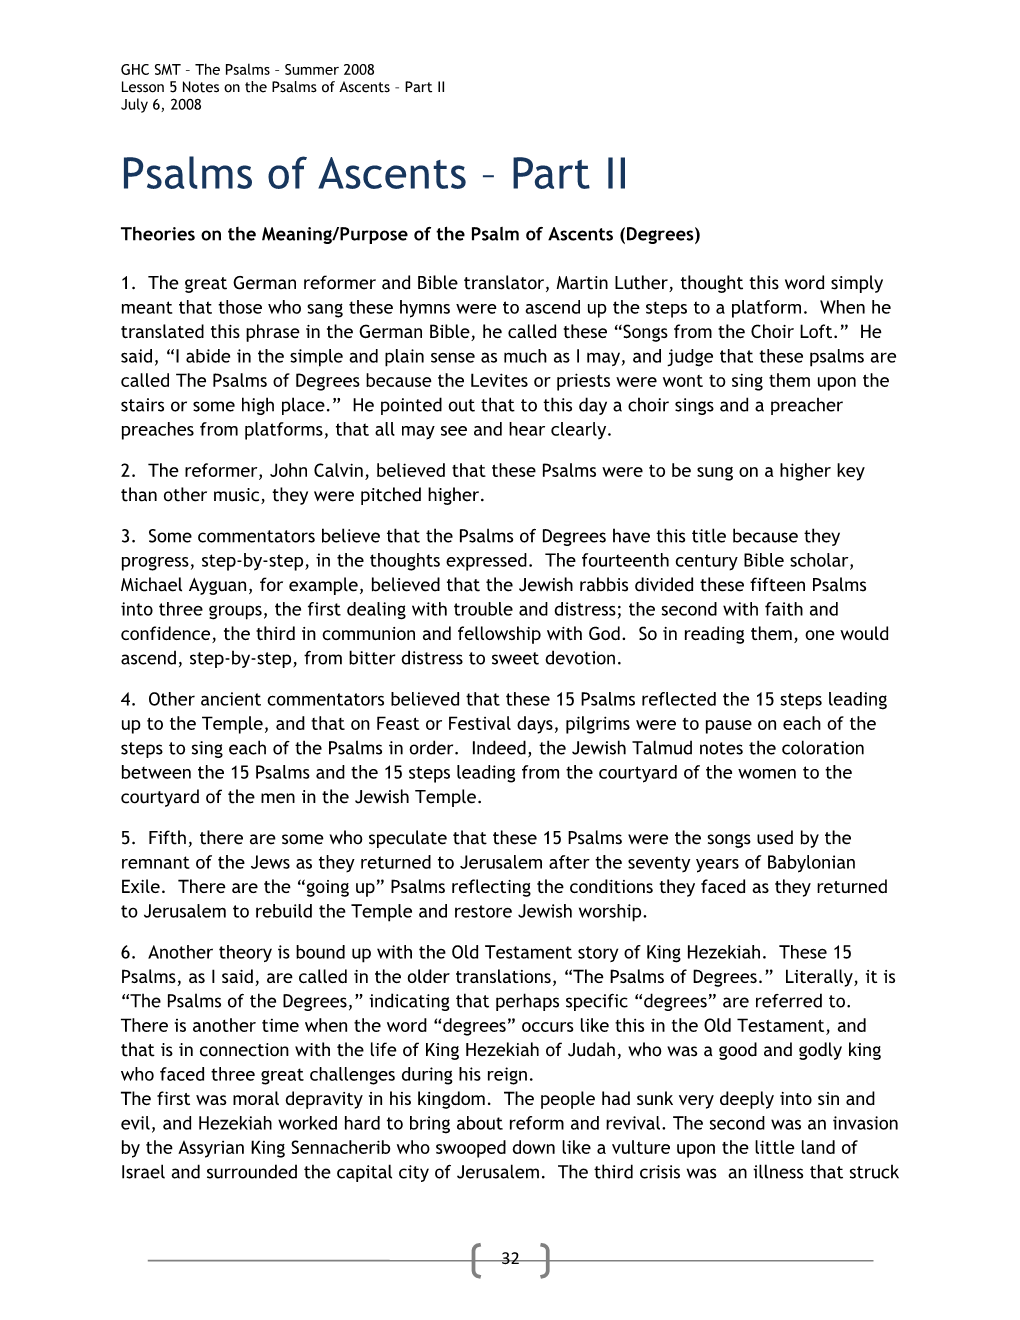 Psalms of Ascents Part II